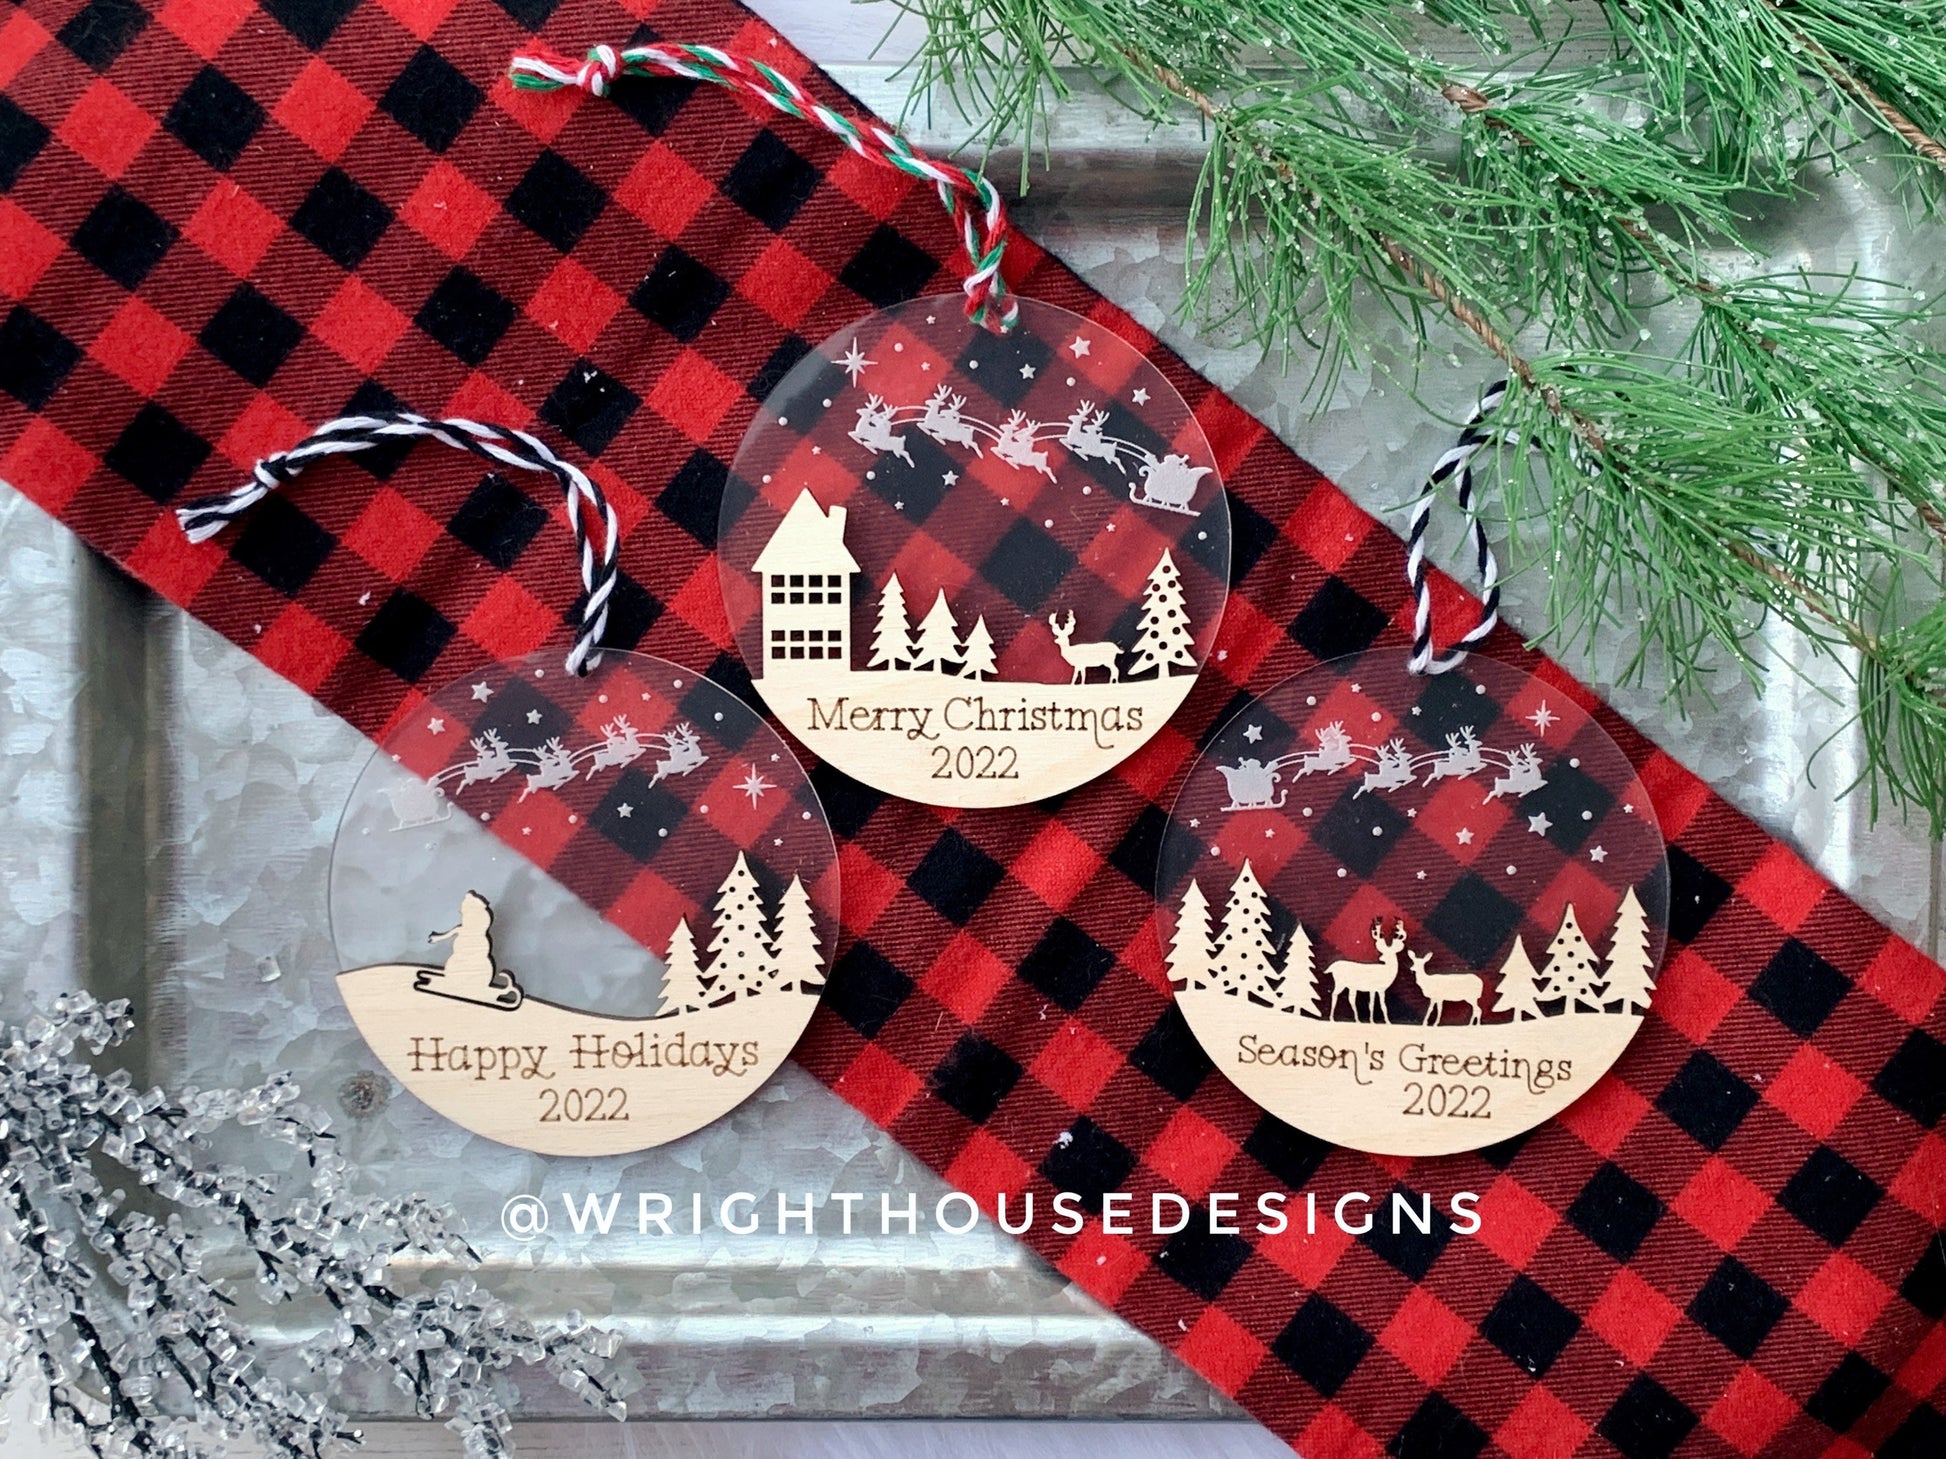 Santa’s Sleigh - Wooded Winter Cabin Scene - Yearly Christmas Eve Tree Ornament - Layered Wood and Acrylic - Stocking Tag - Holiday Decor